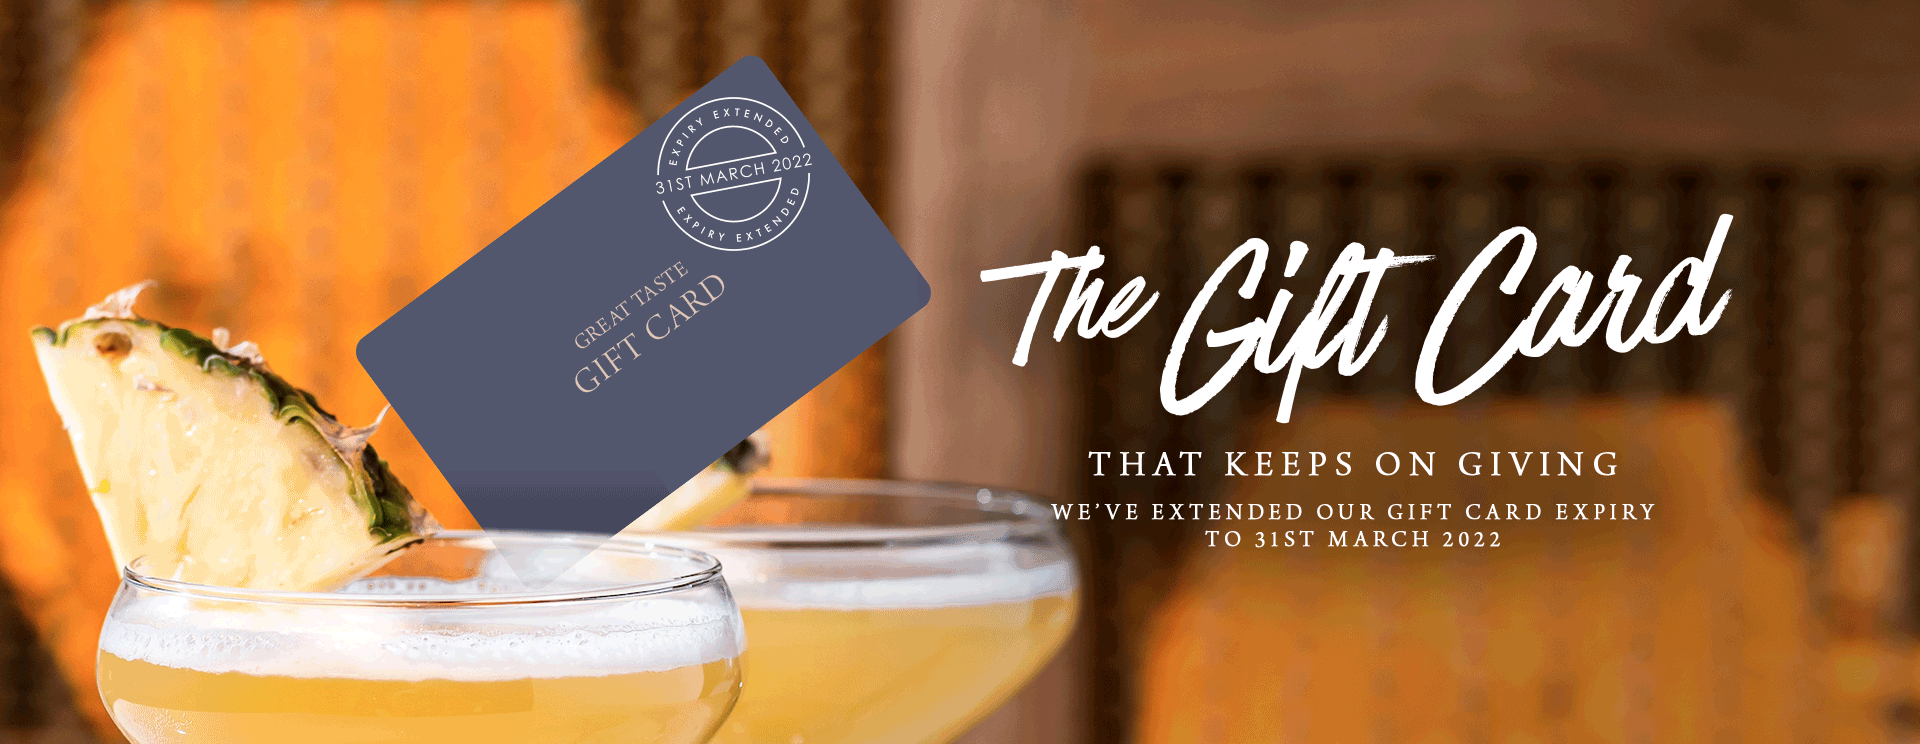 Give the gift of a gift card at The George